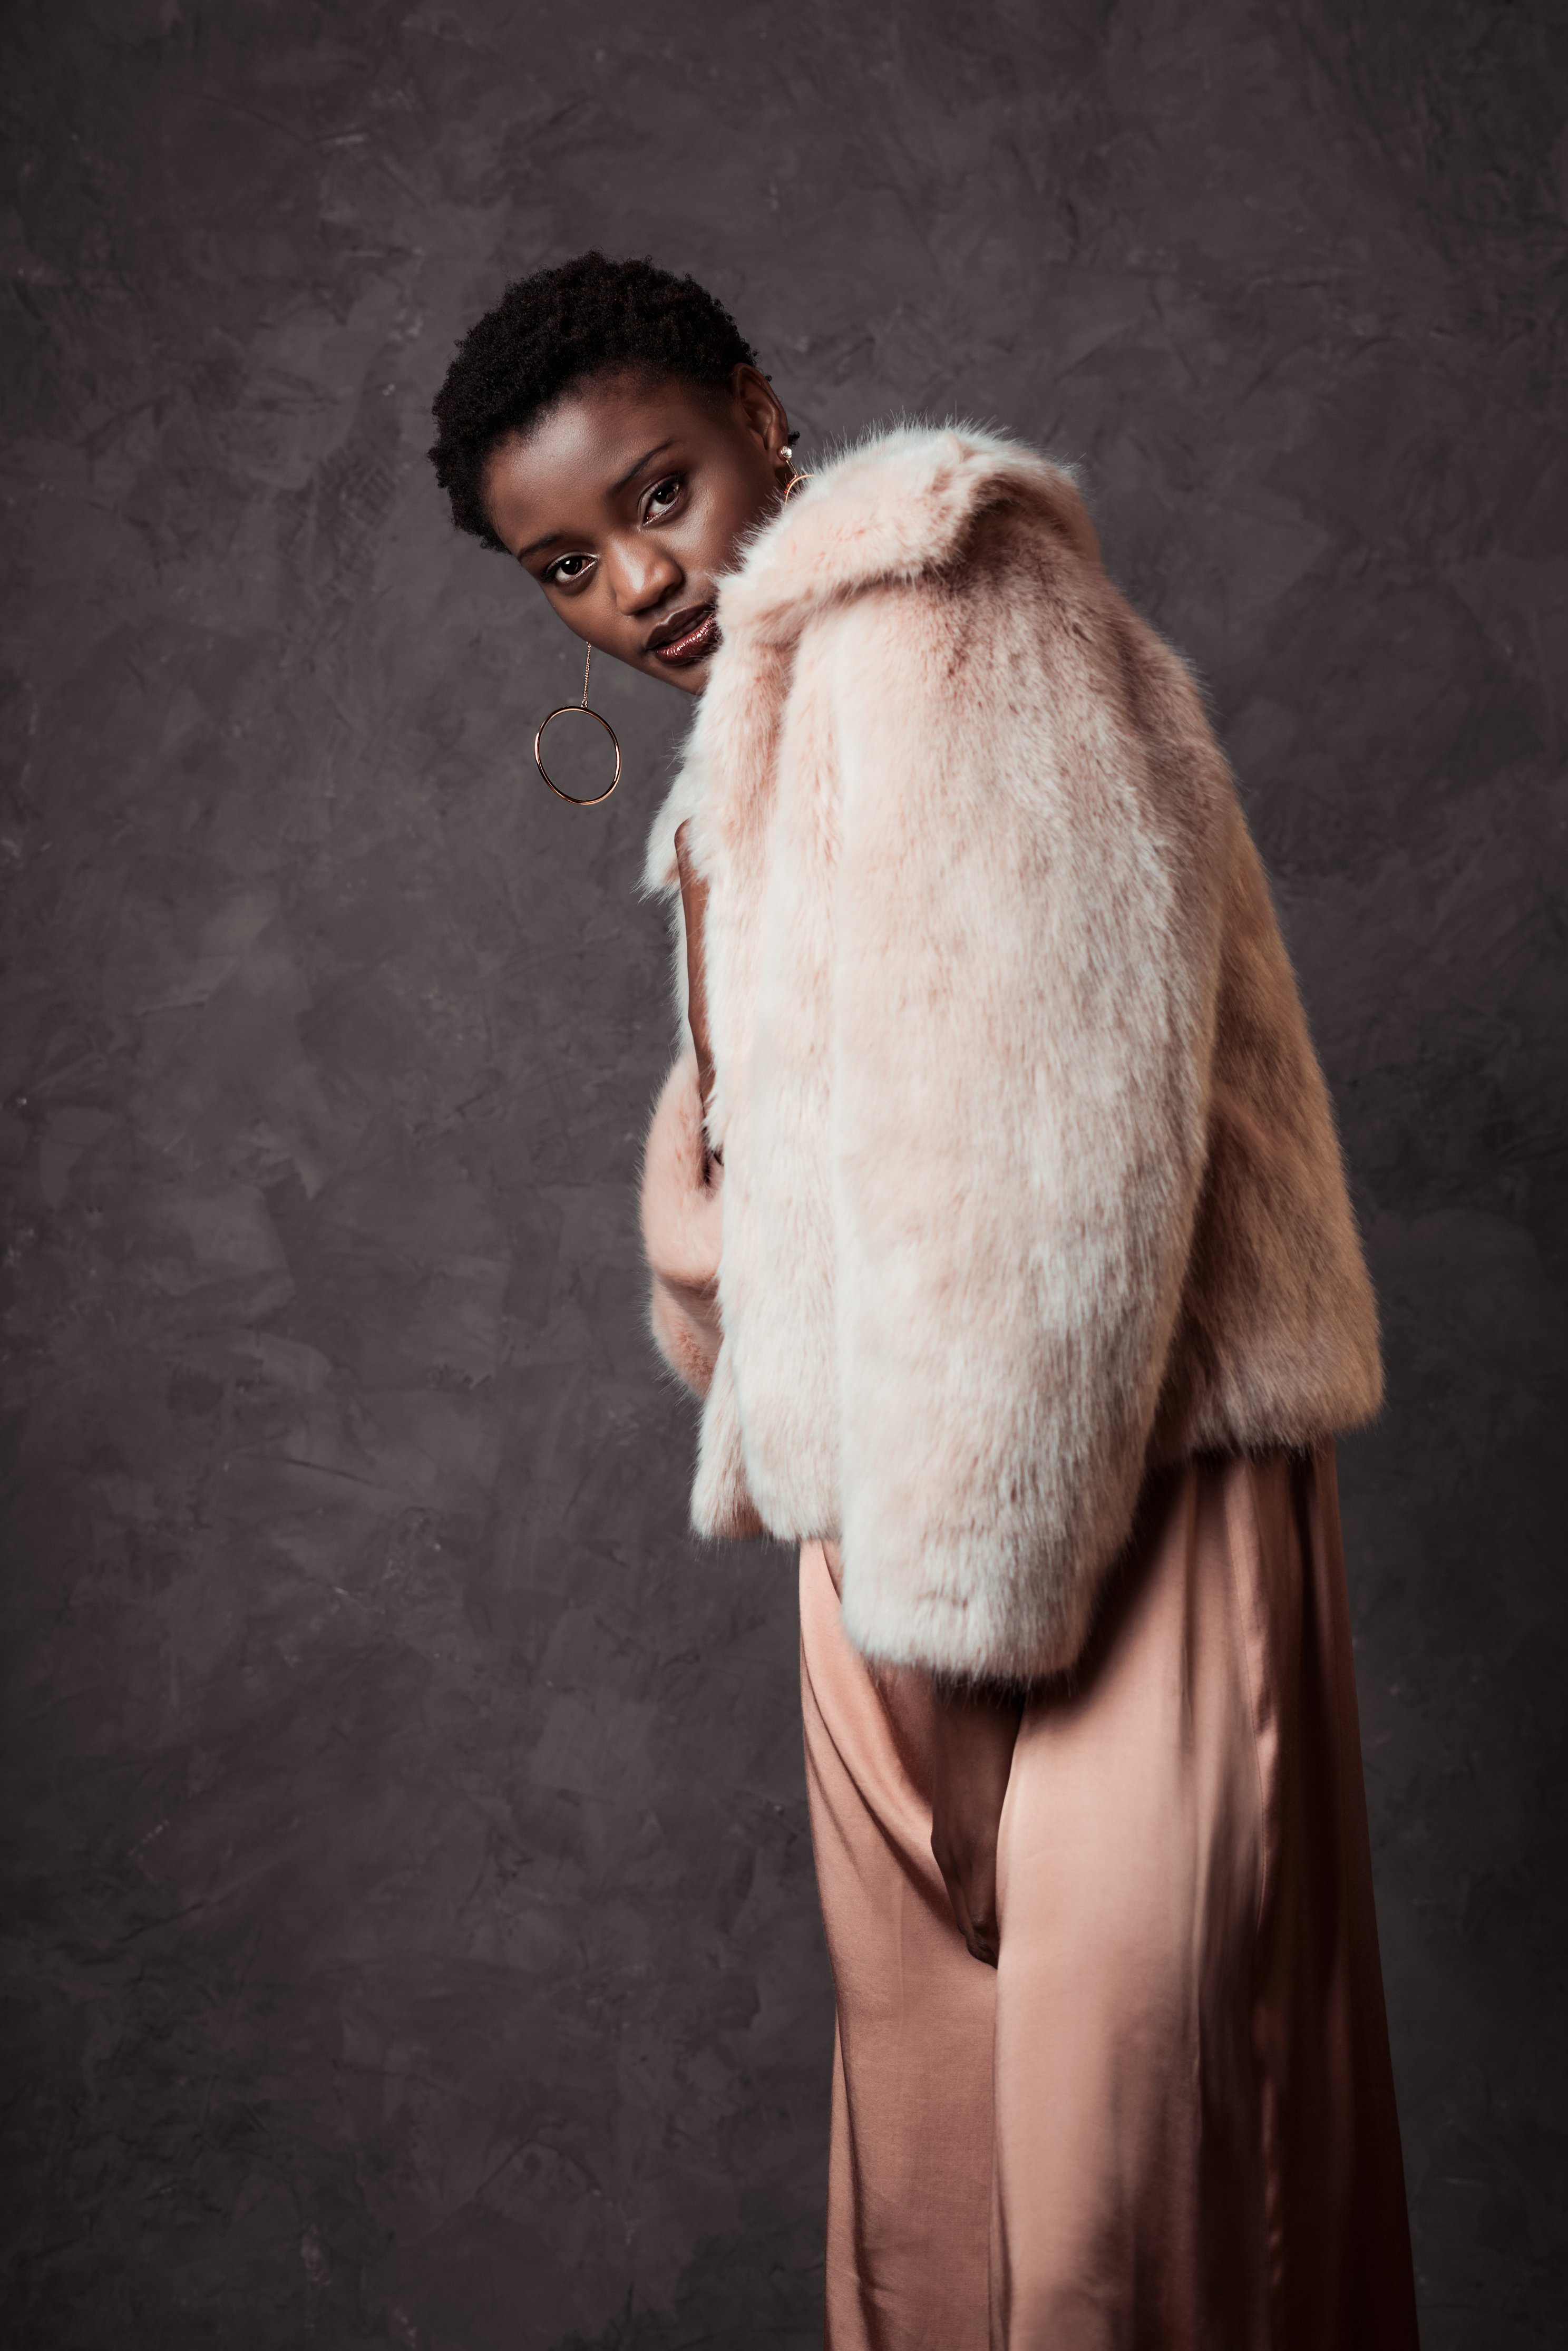 Topshop Petite Luxe Faux Fur Coat, 8 Holiday Fashion Trends That Will Make  You Feel Like a Glam Queen, For Sure